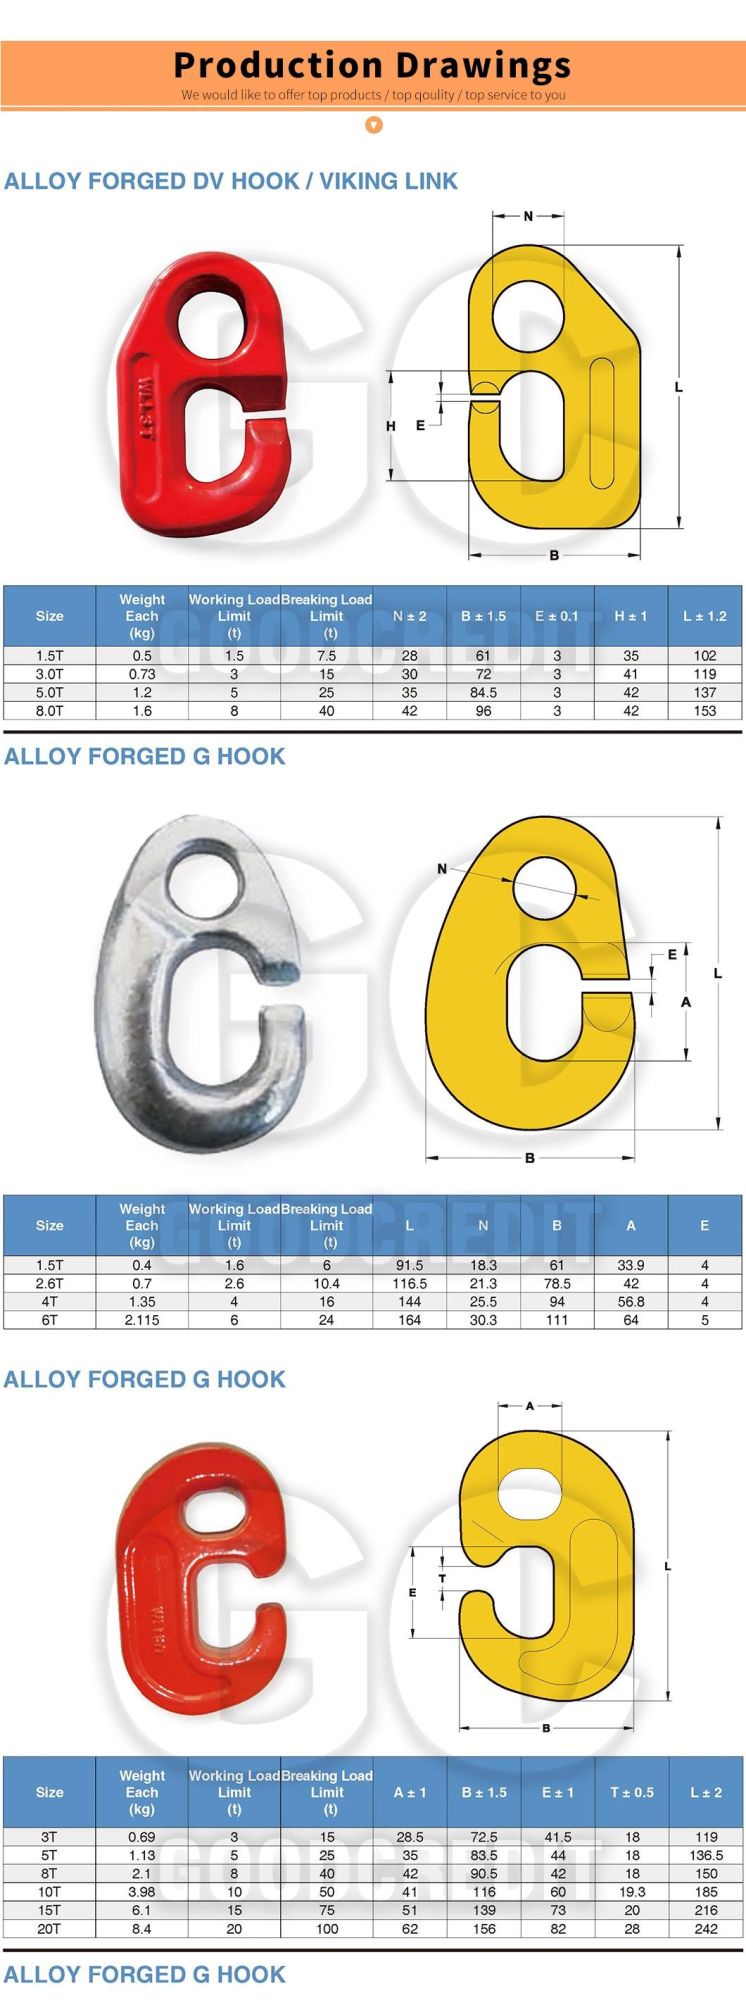 Fishing and Overseas Rigging G80 Alloy Steel Forged Viking Link DV Hook G Hook